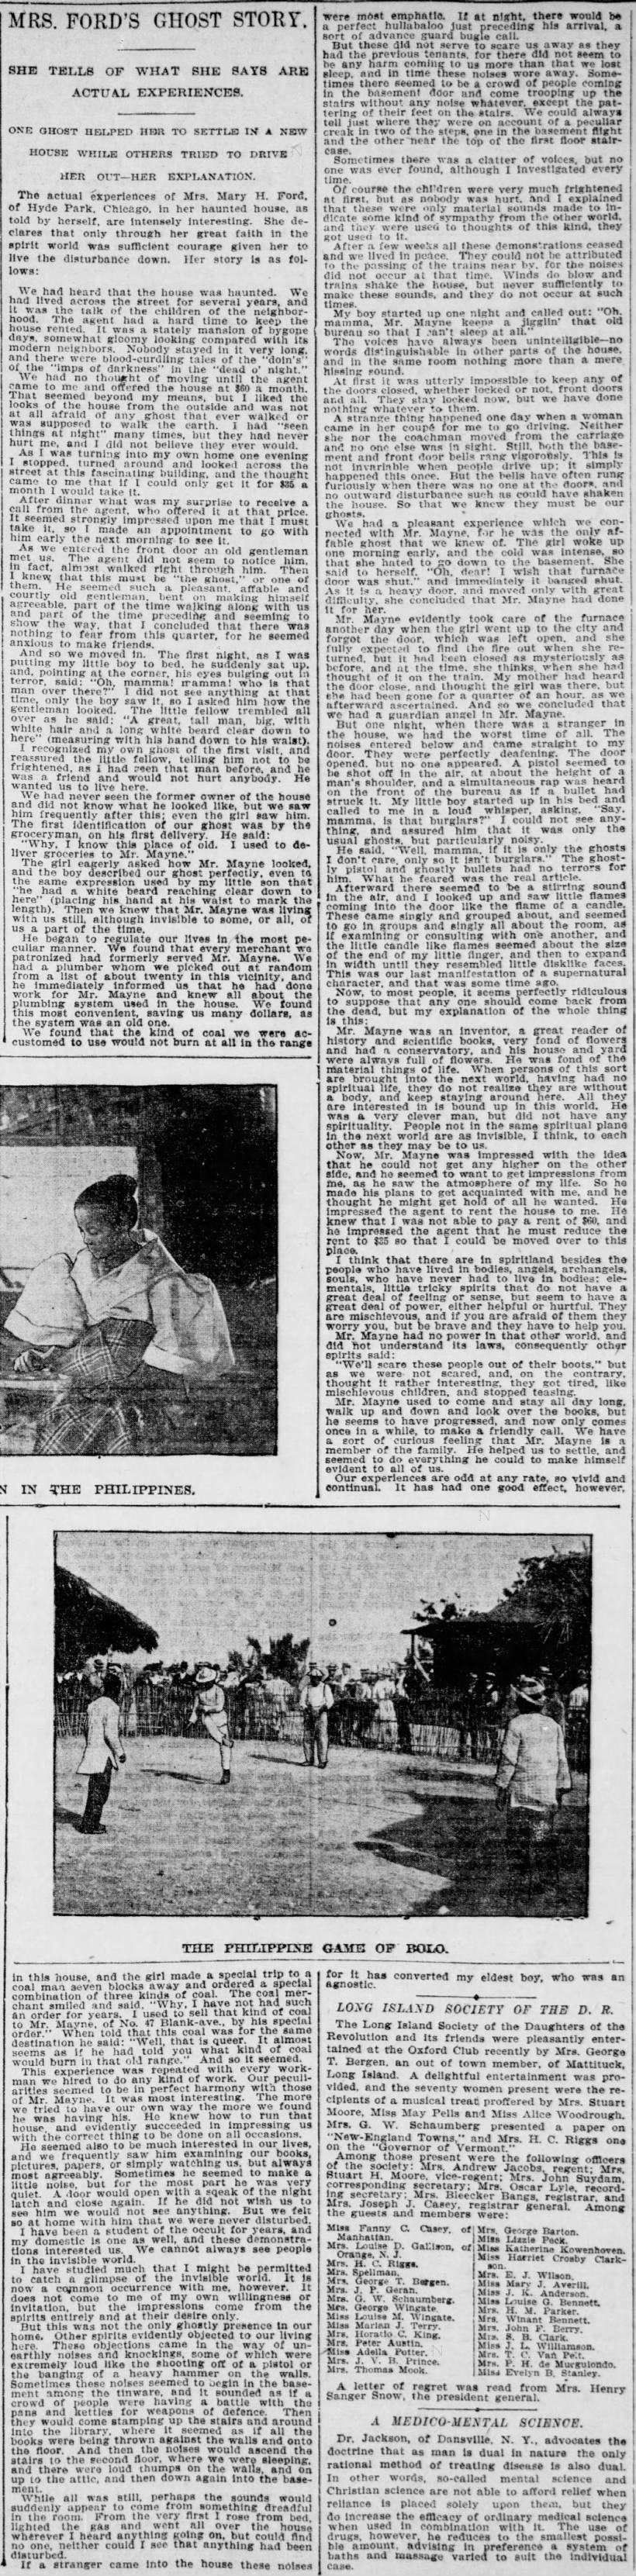 later Baha'i Mary Hanford Ford article on haunted house